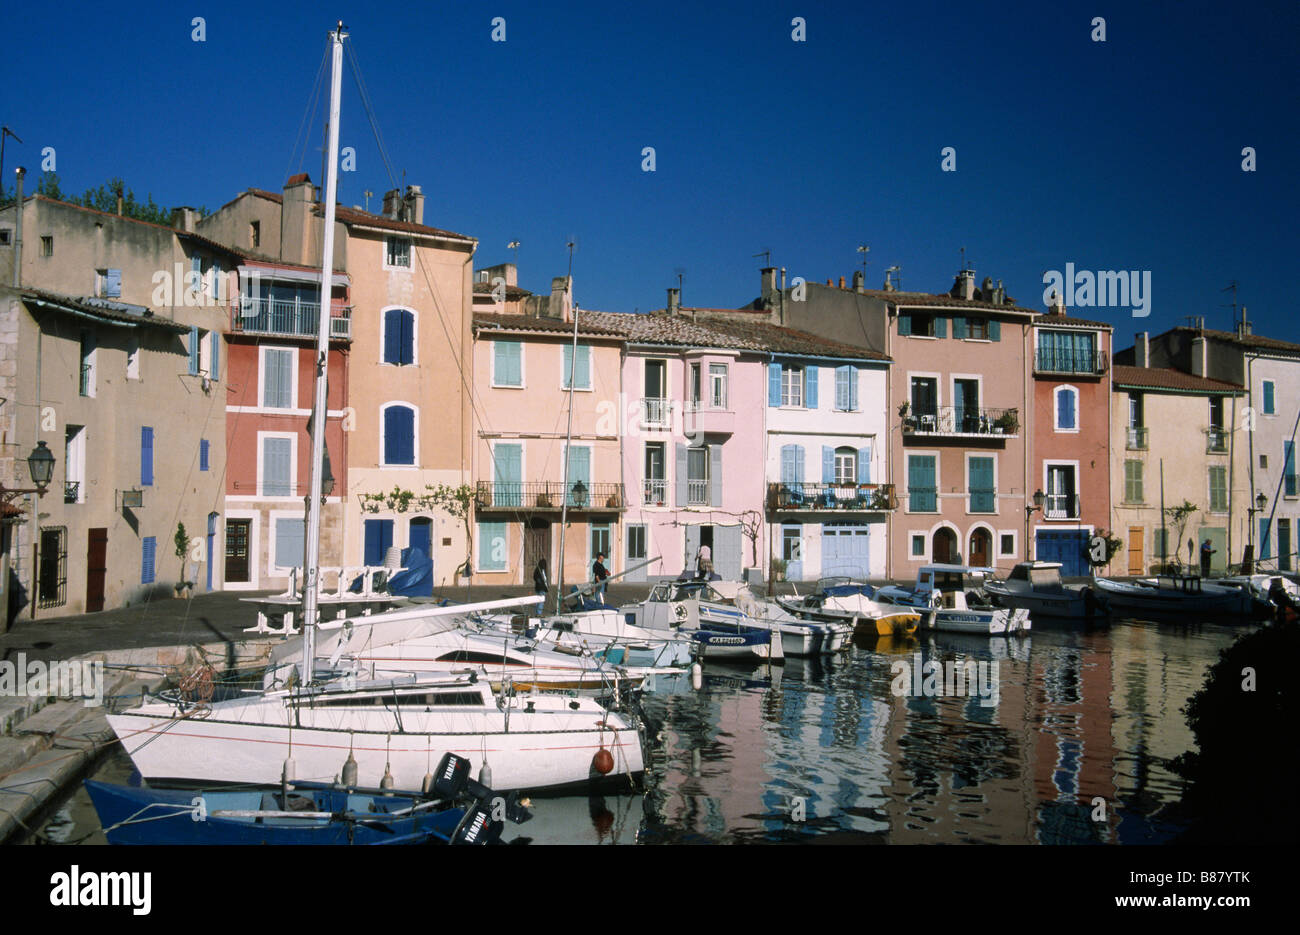 Caronte channel Etang de Berre Canal waterway Martigues Boats moored ...